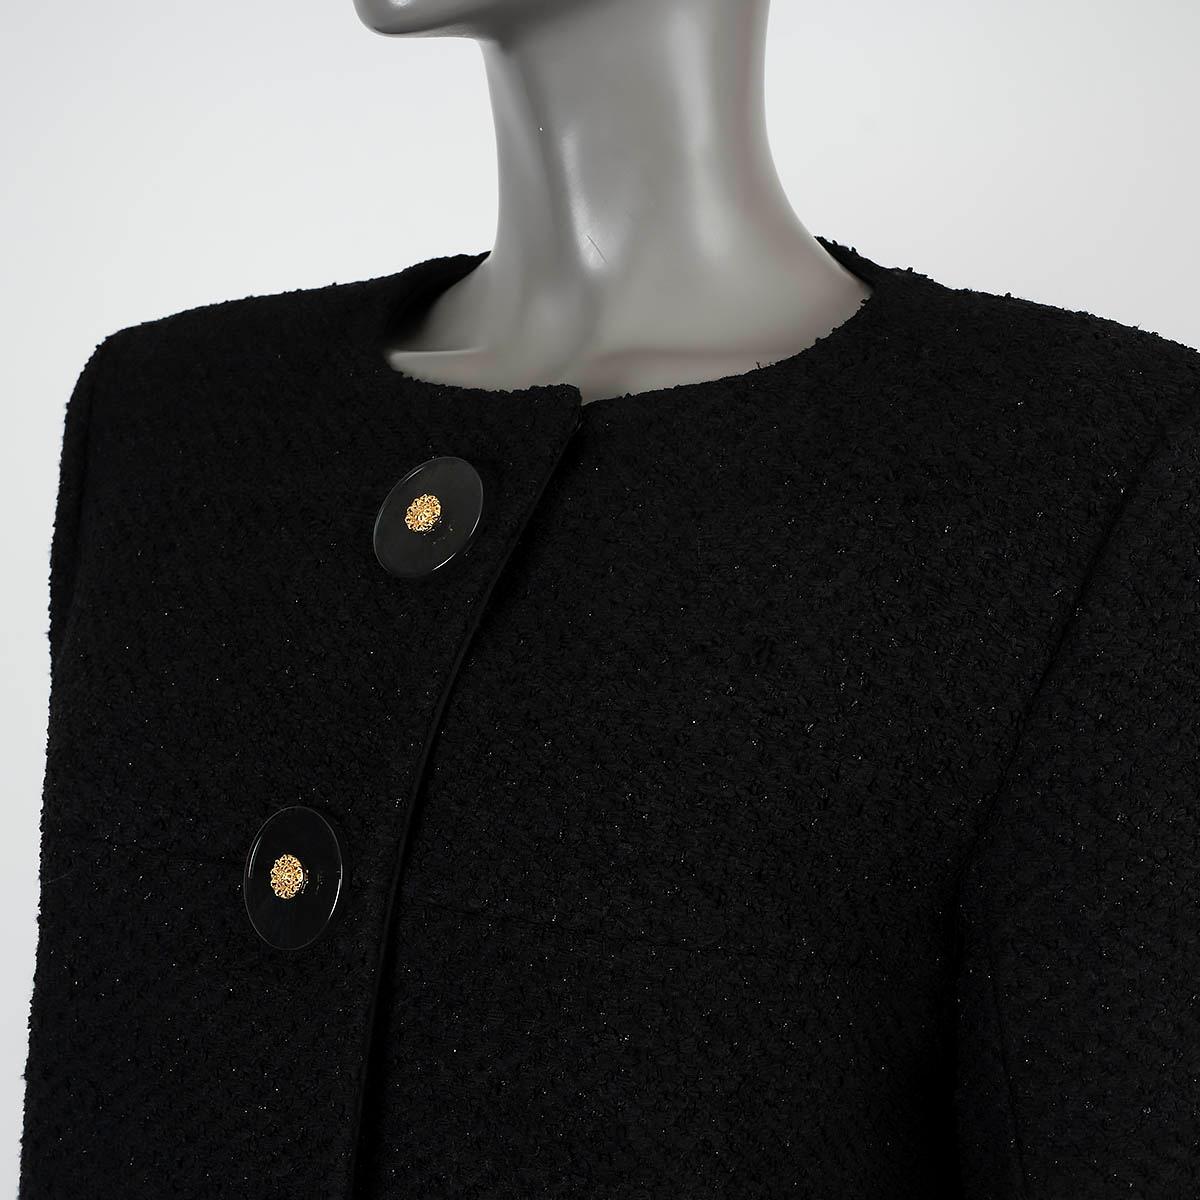 CHANEL black rayon 2017 17A COSMOPOLITE EMBROIDERED TWEED Jacket 42 L For Sale 2